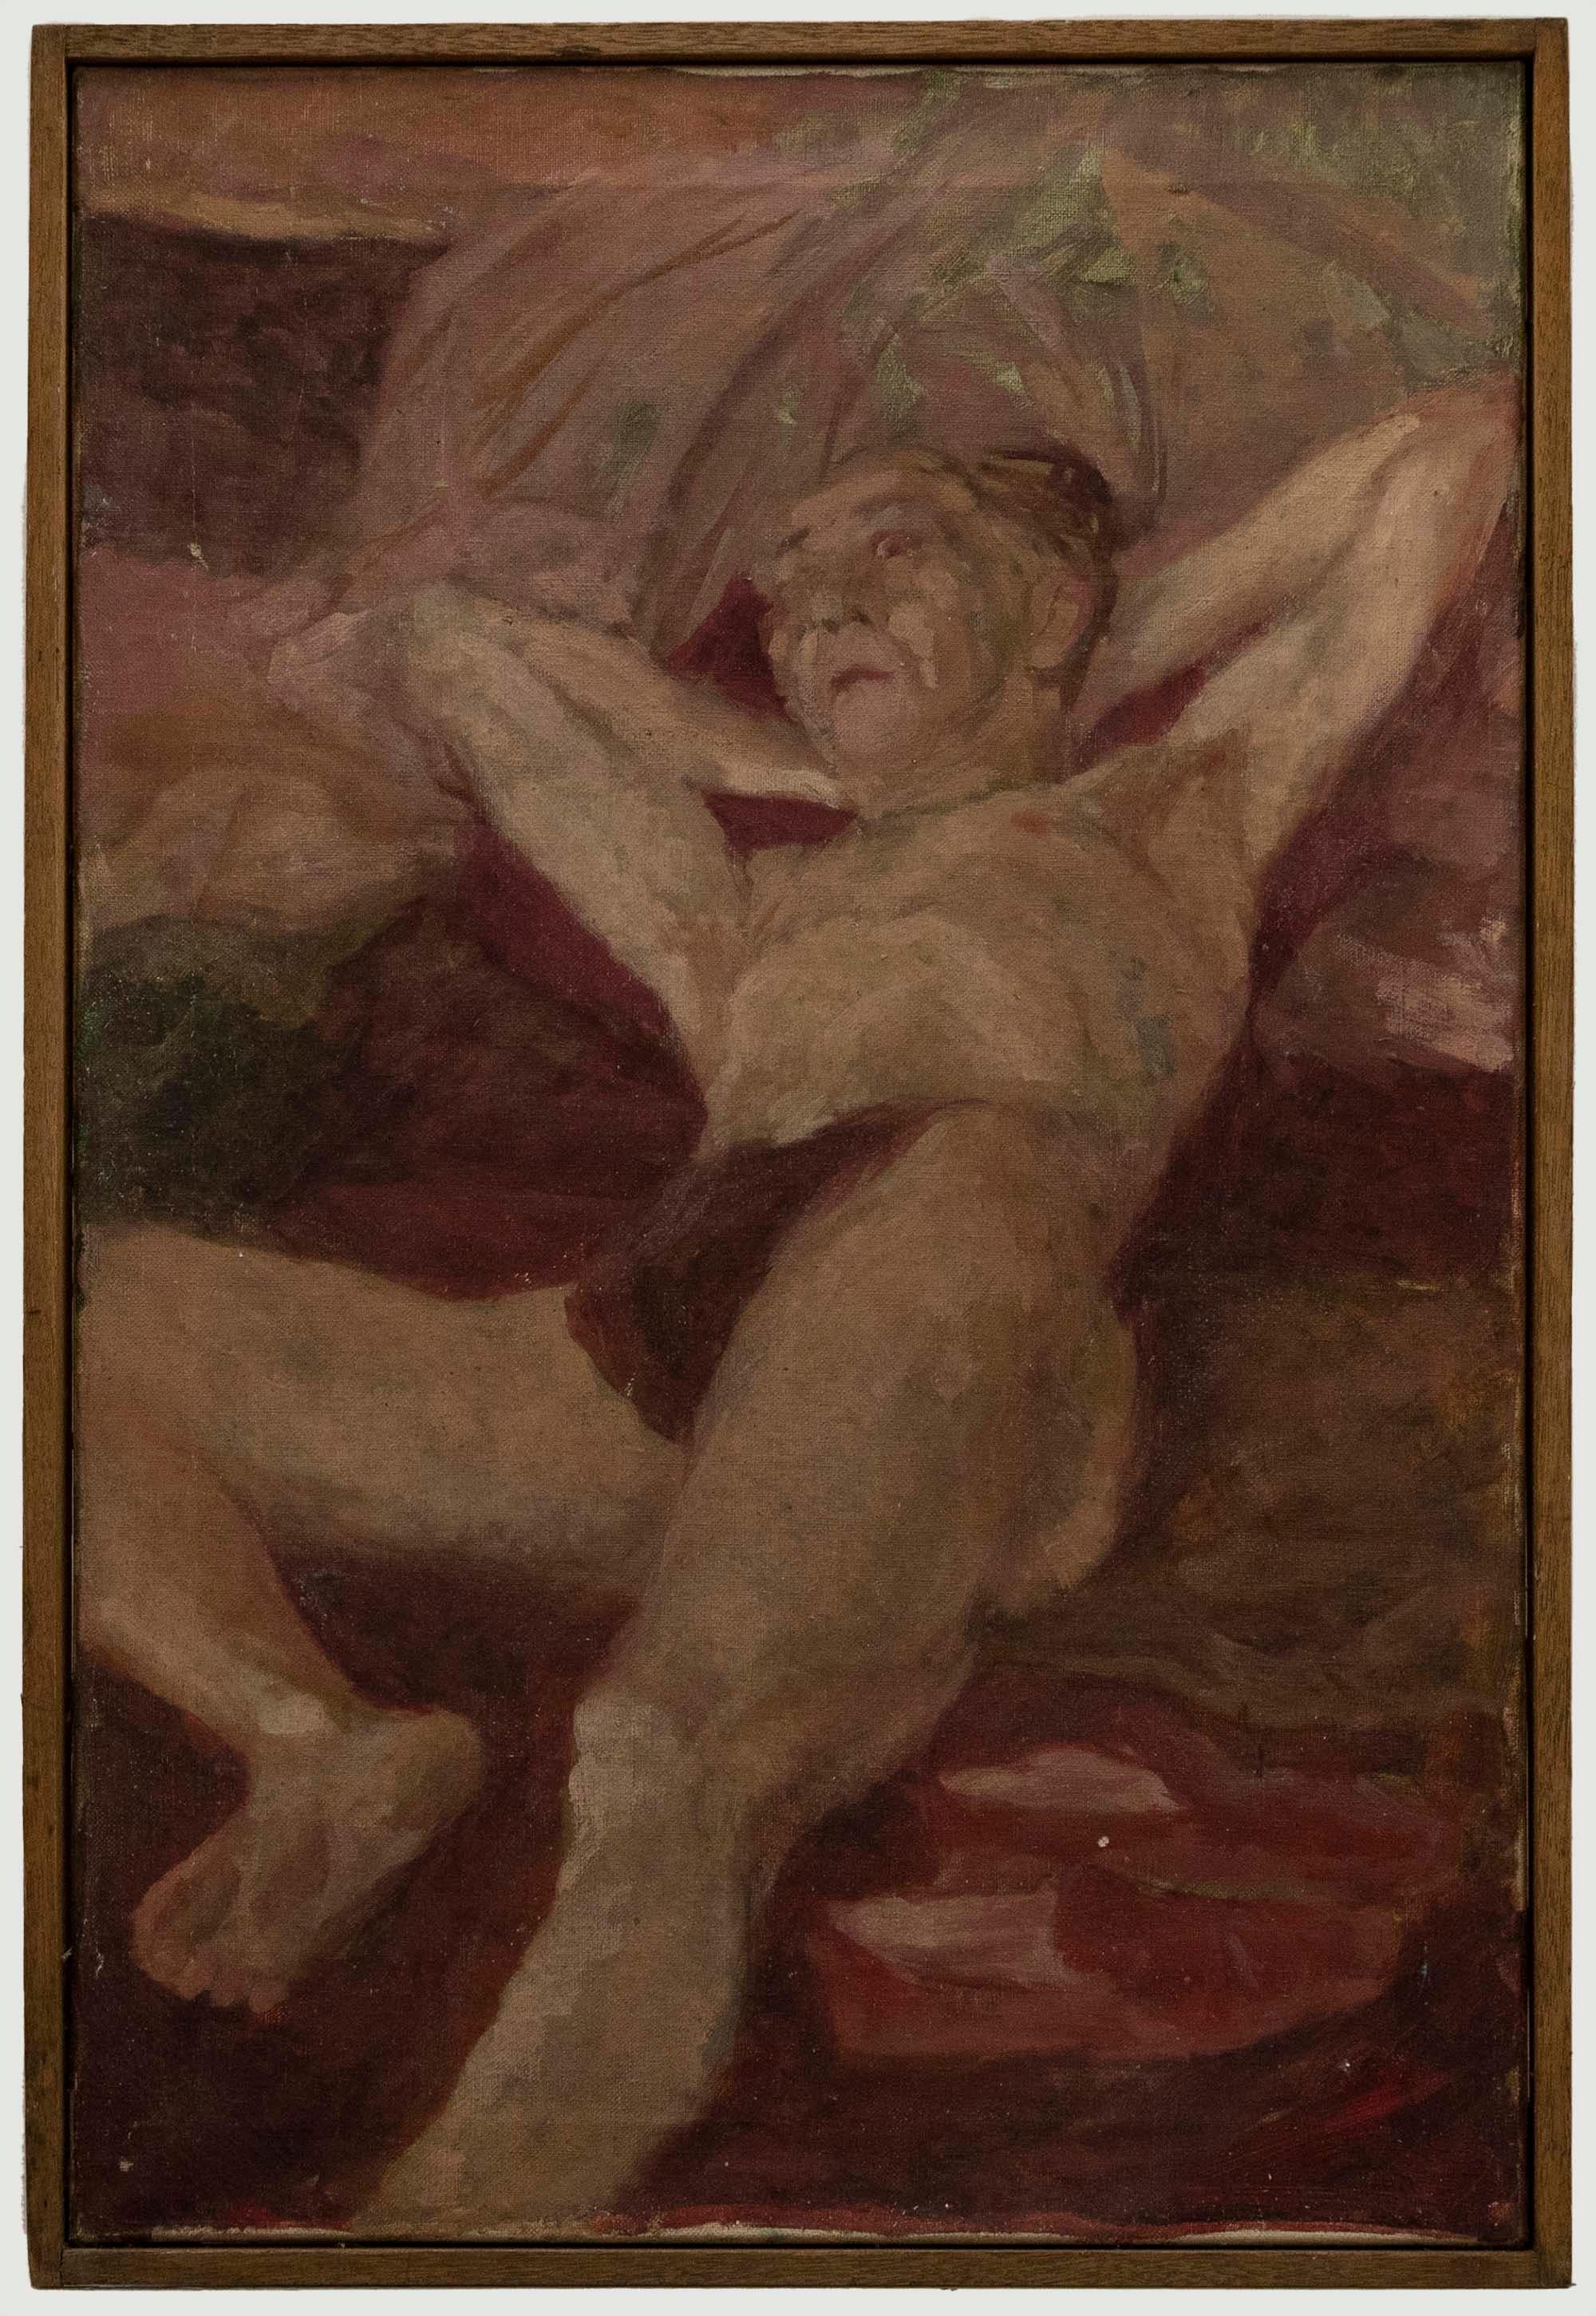 Unknown Nude Painting - Early 20th Century Oil - Reclining Man